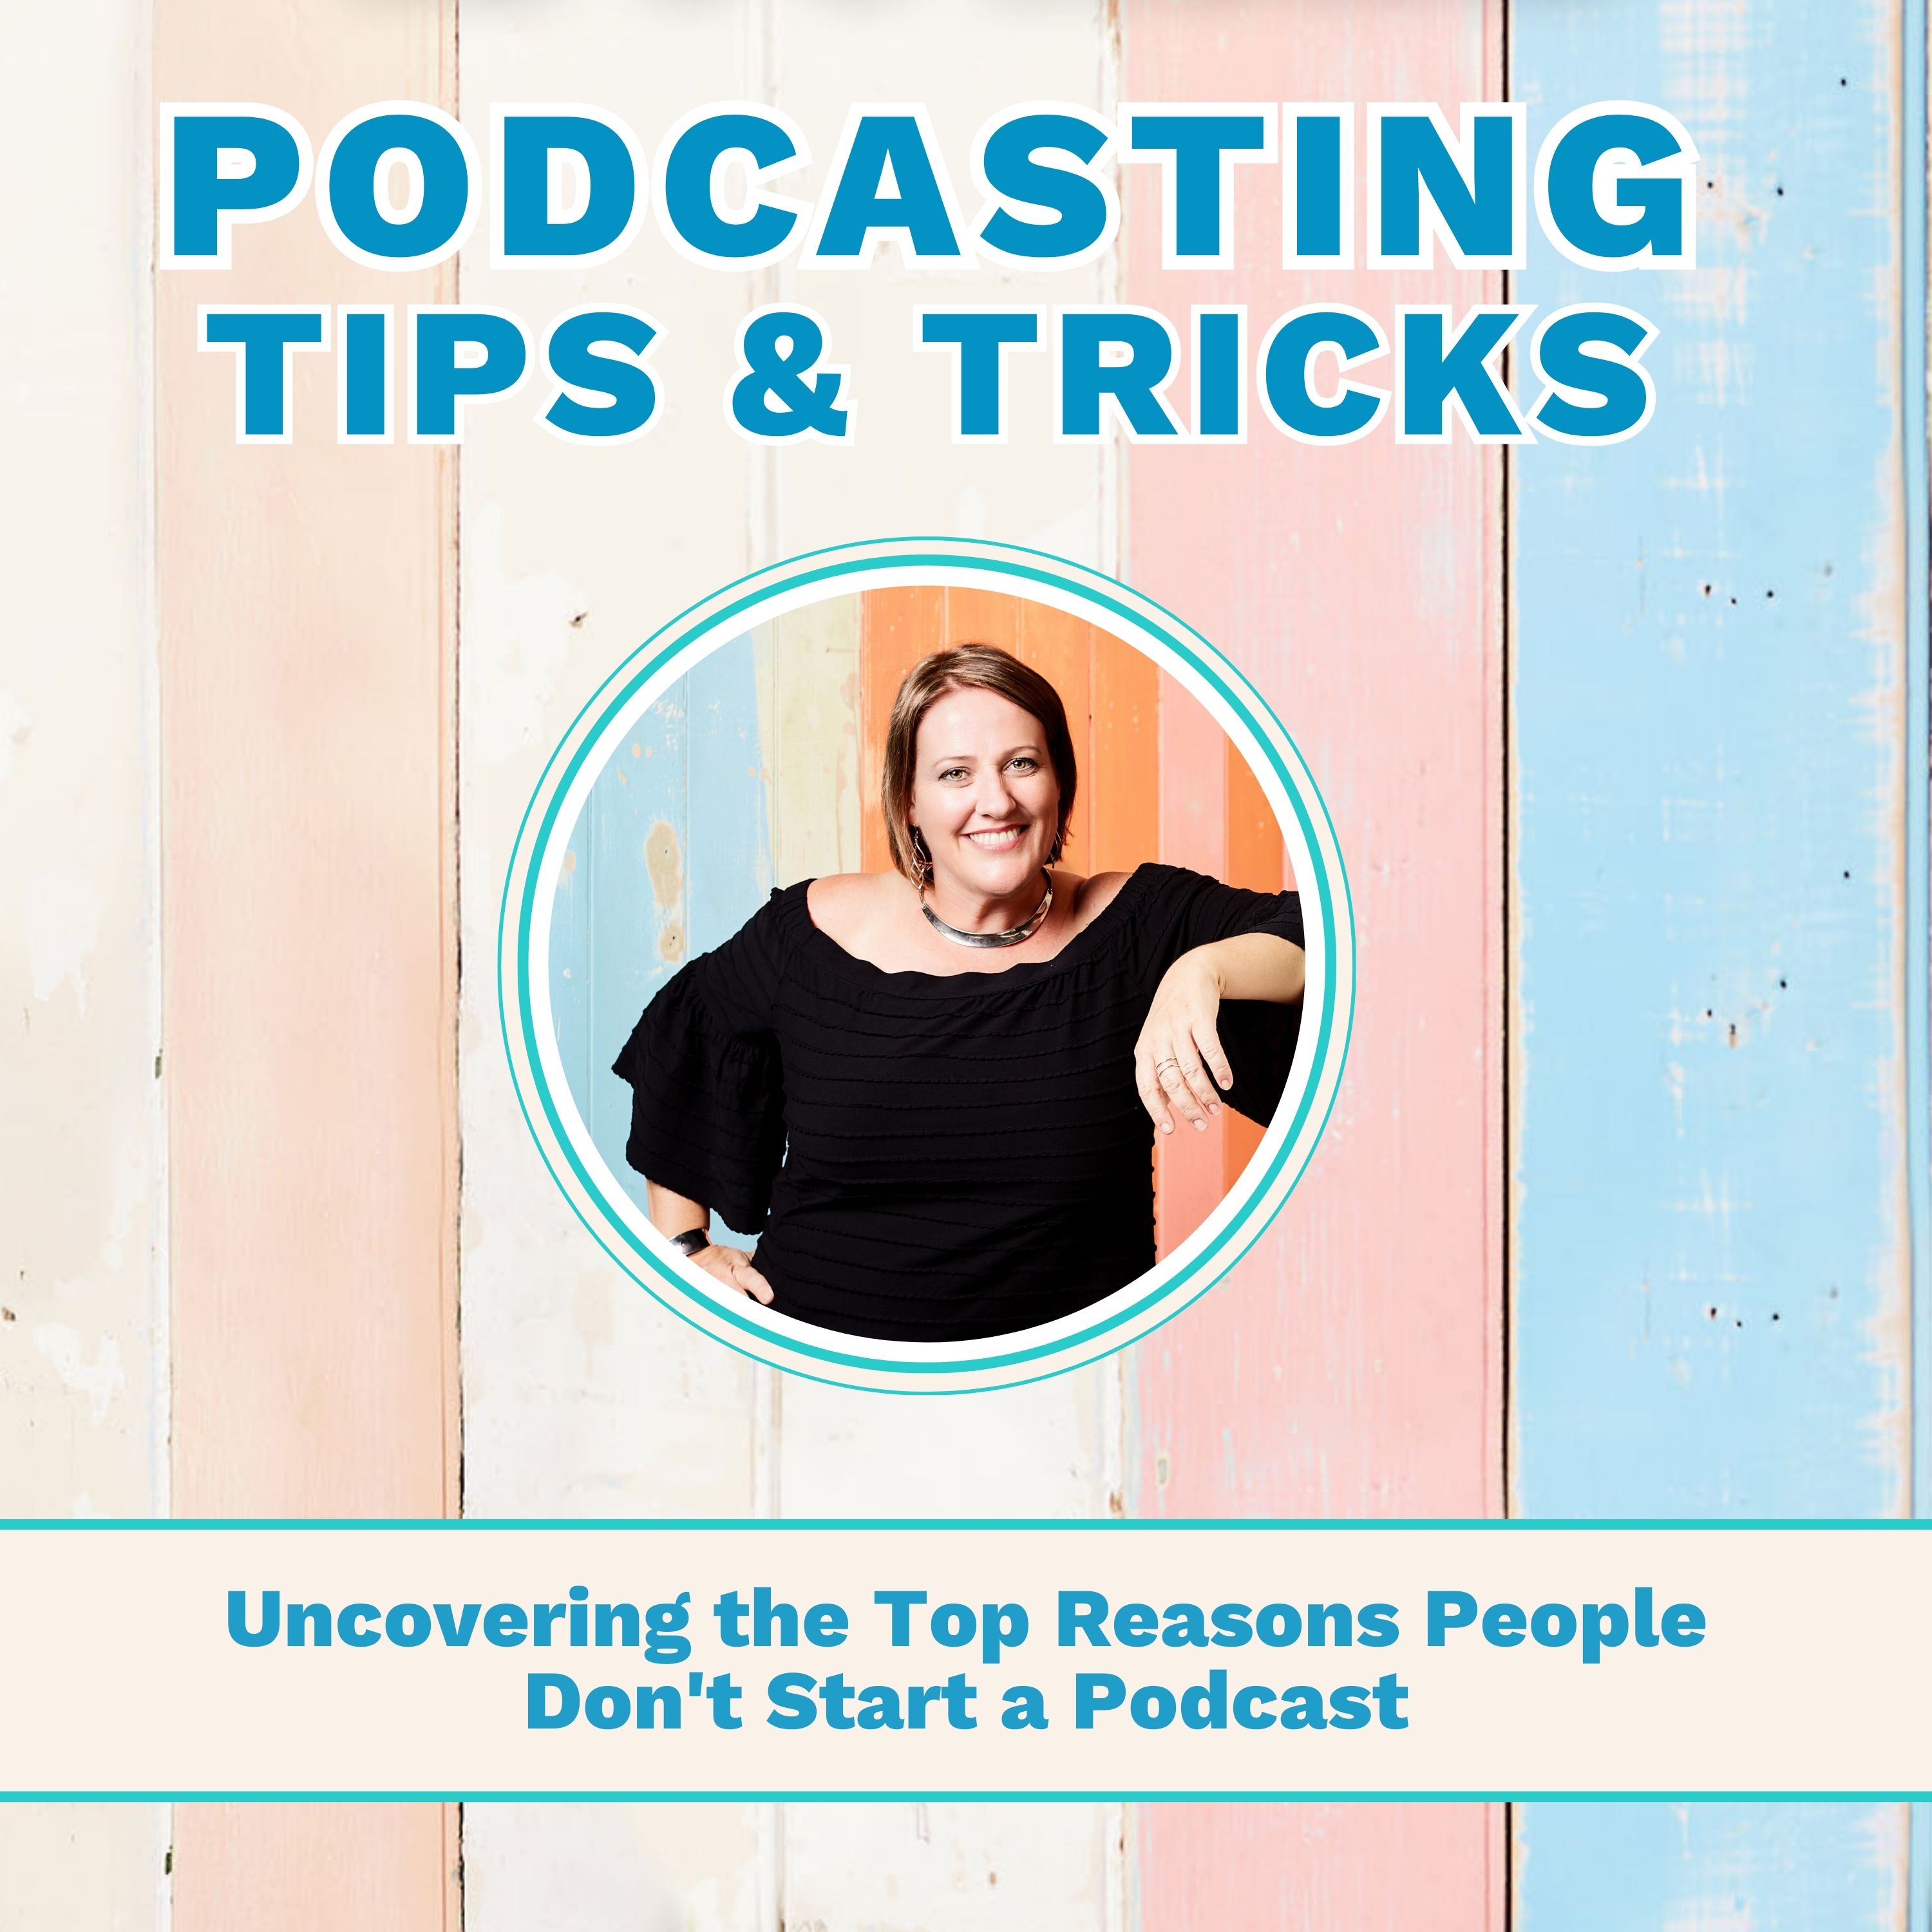 Uncovering the Top Reasons People Don't Start a Podcast